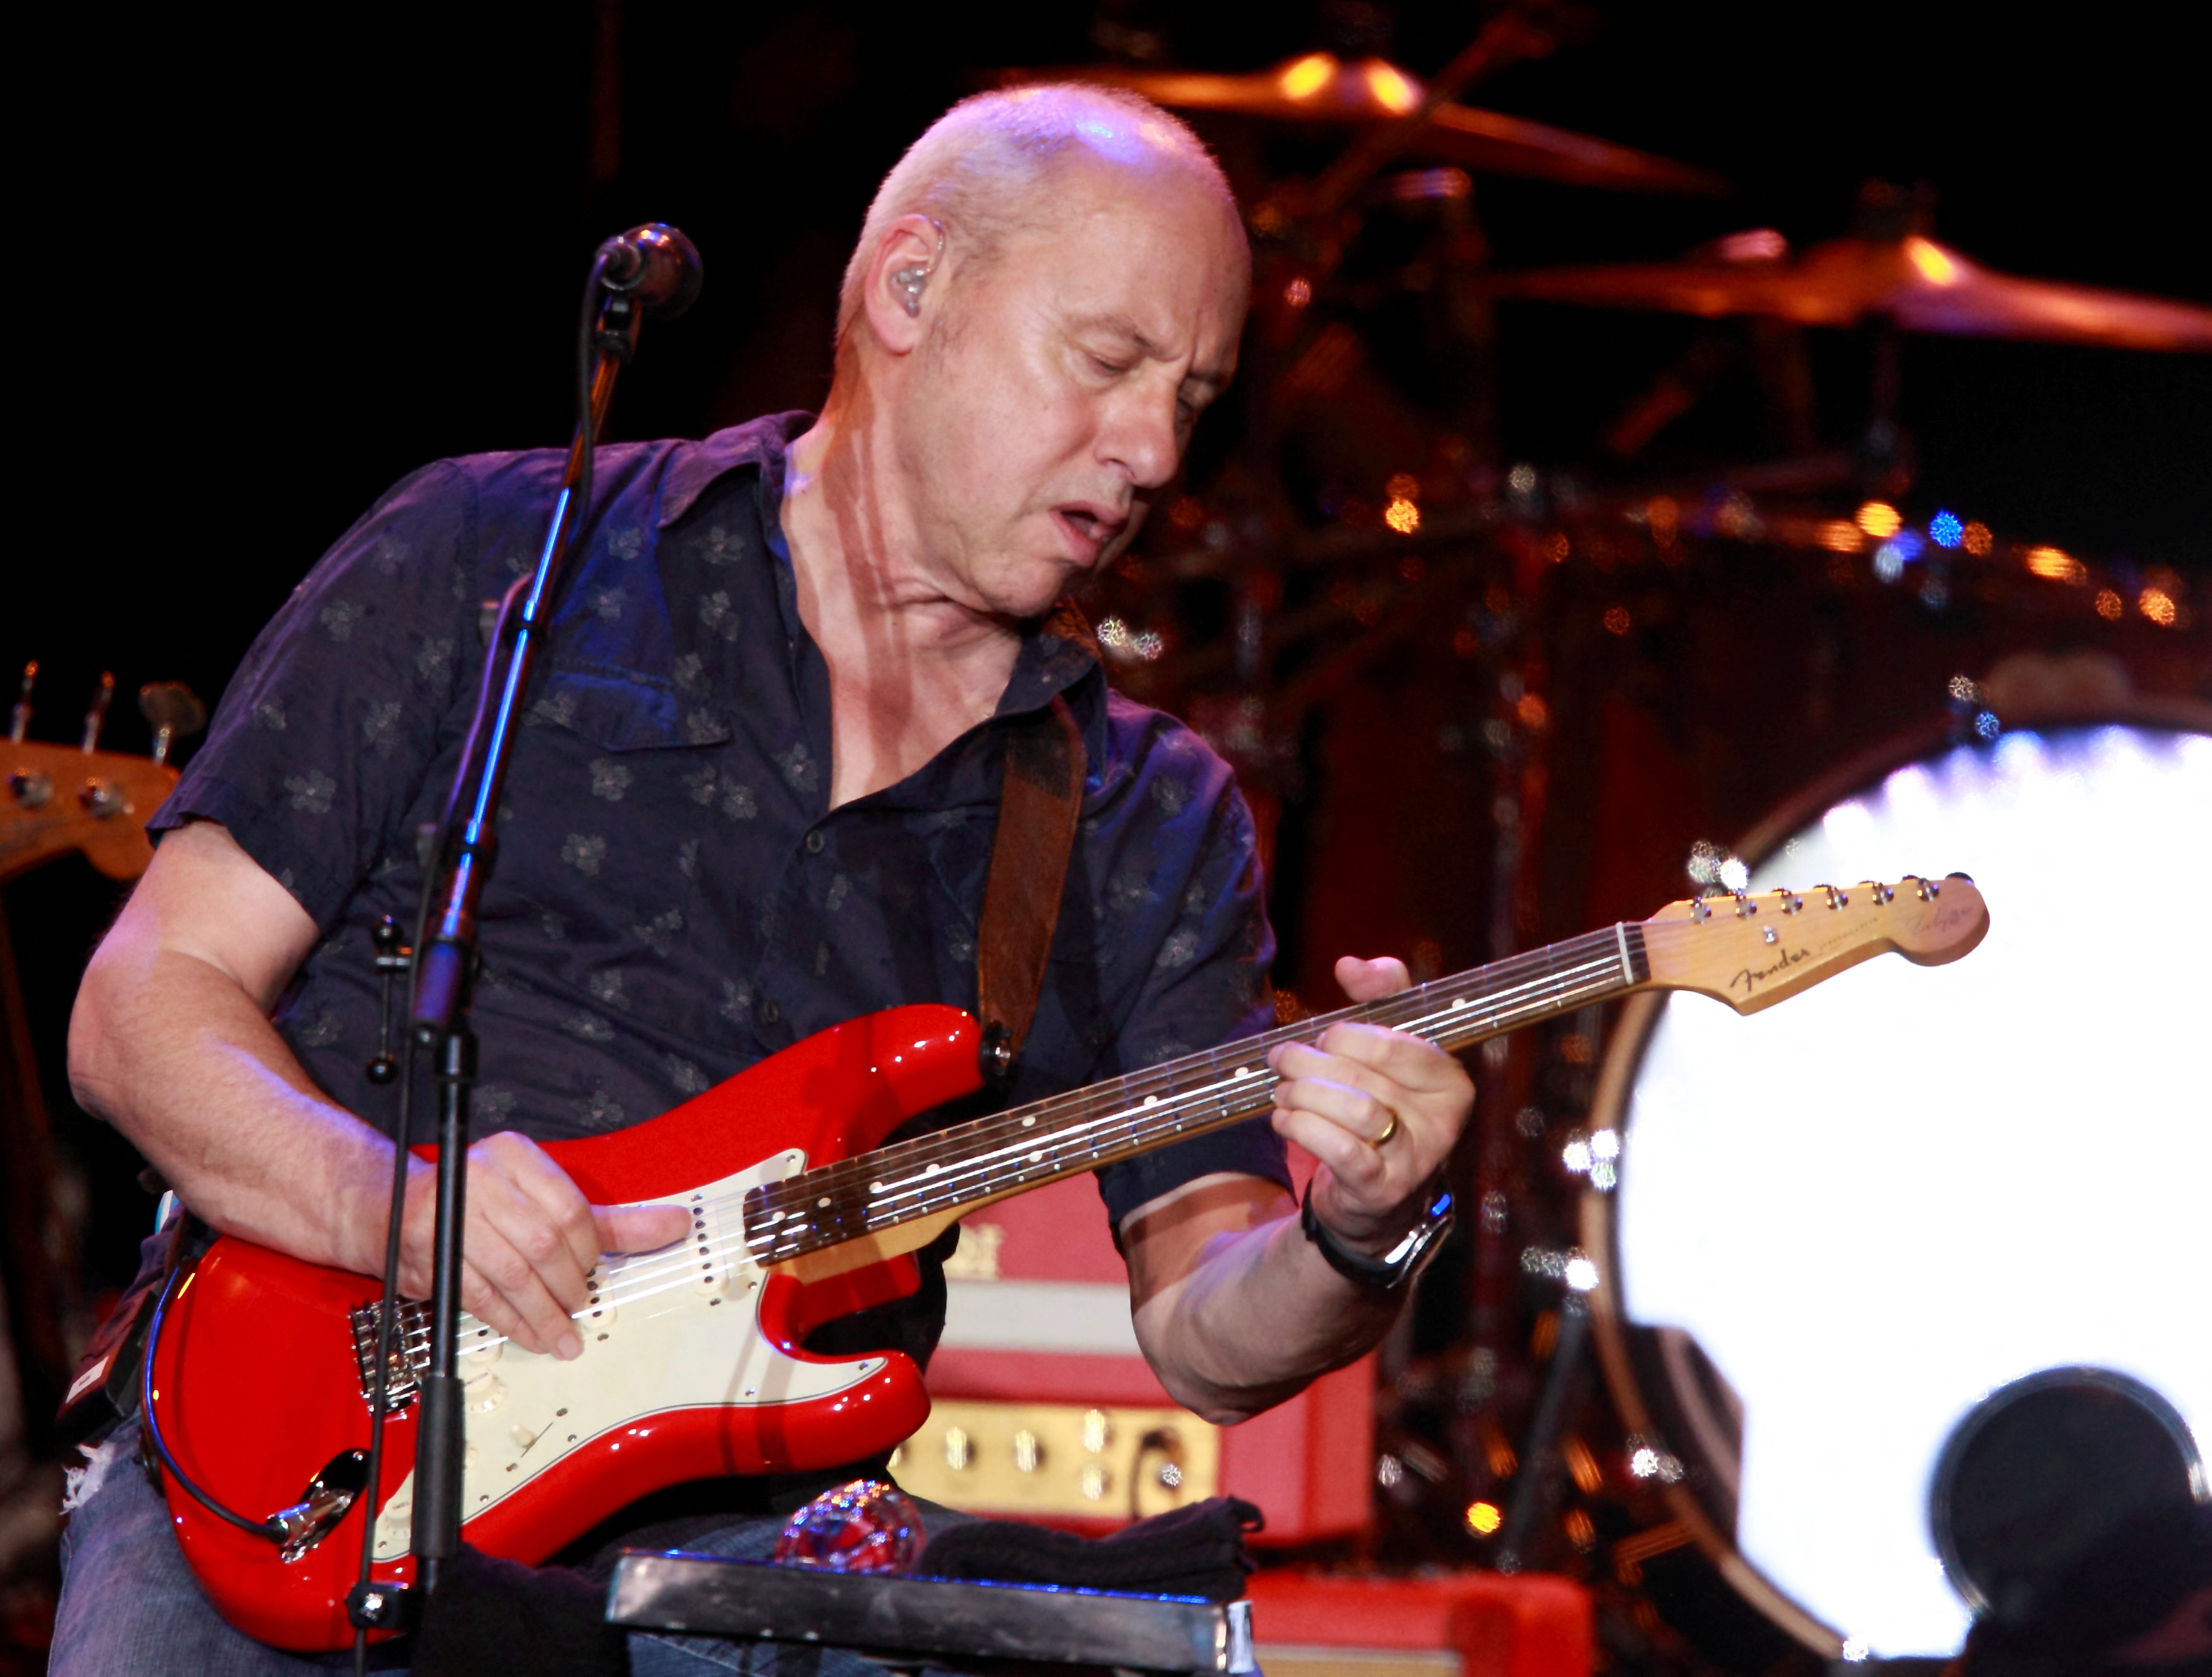 Mark Knopfler's guitar collection raises millions for charity and